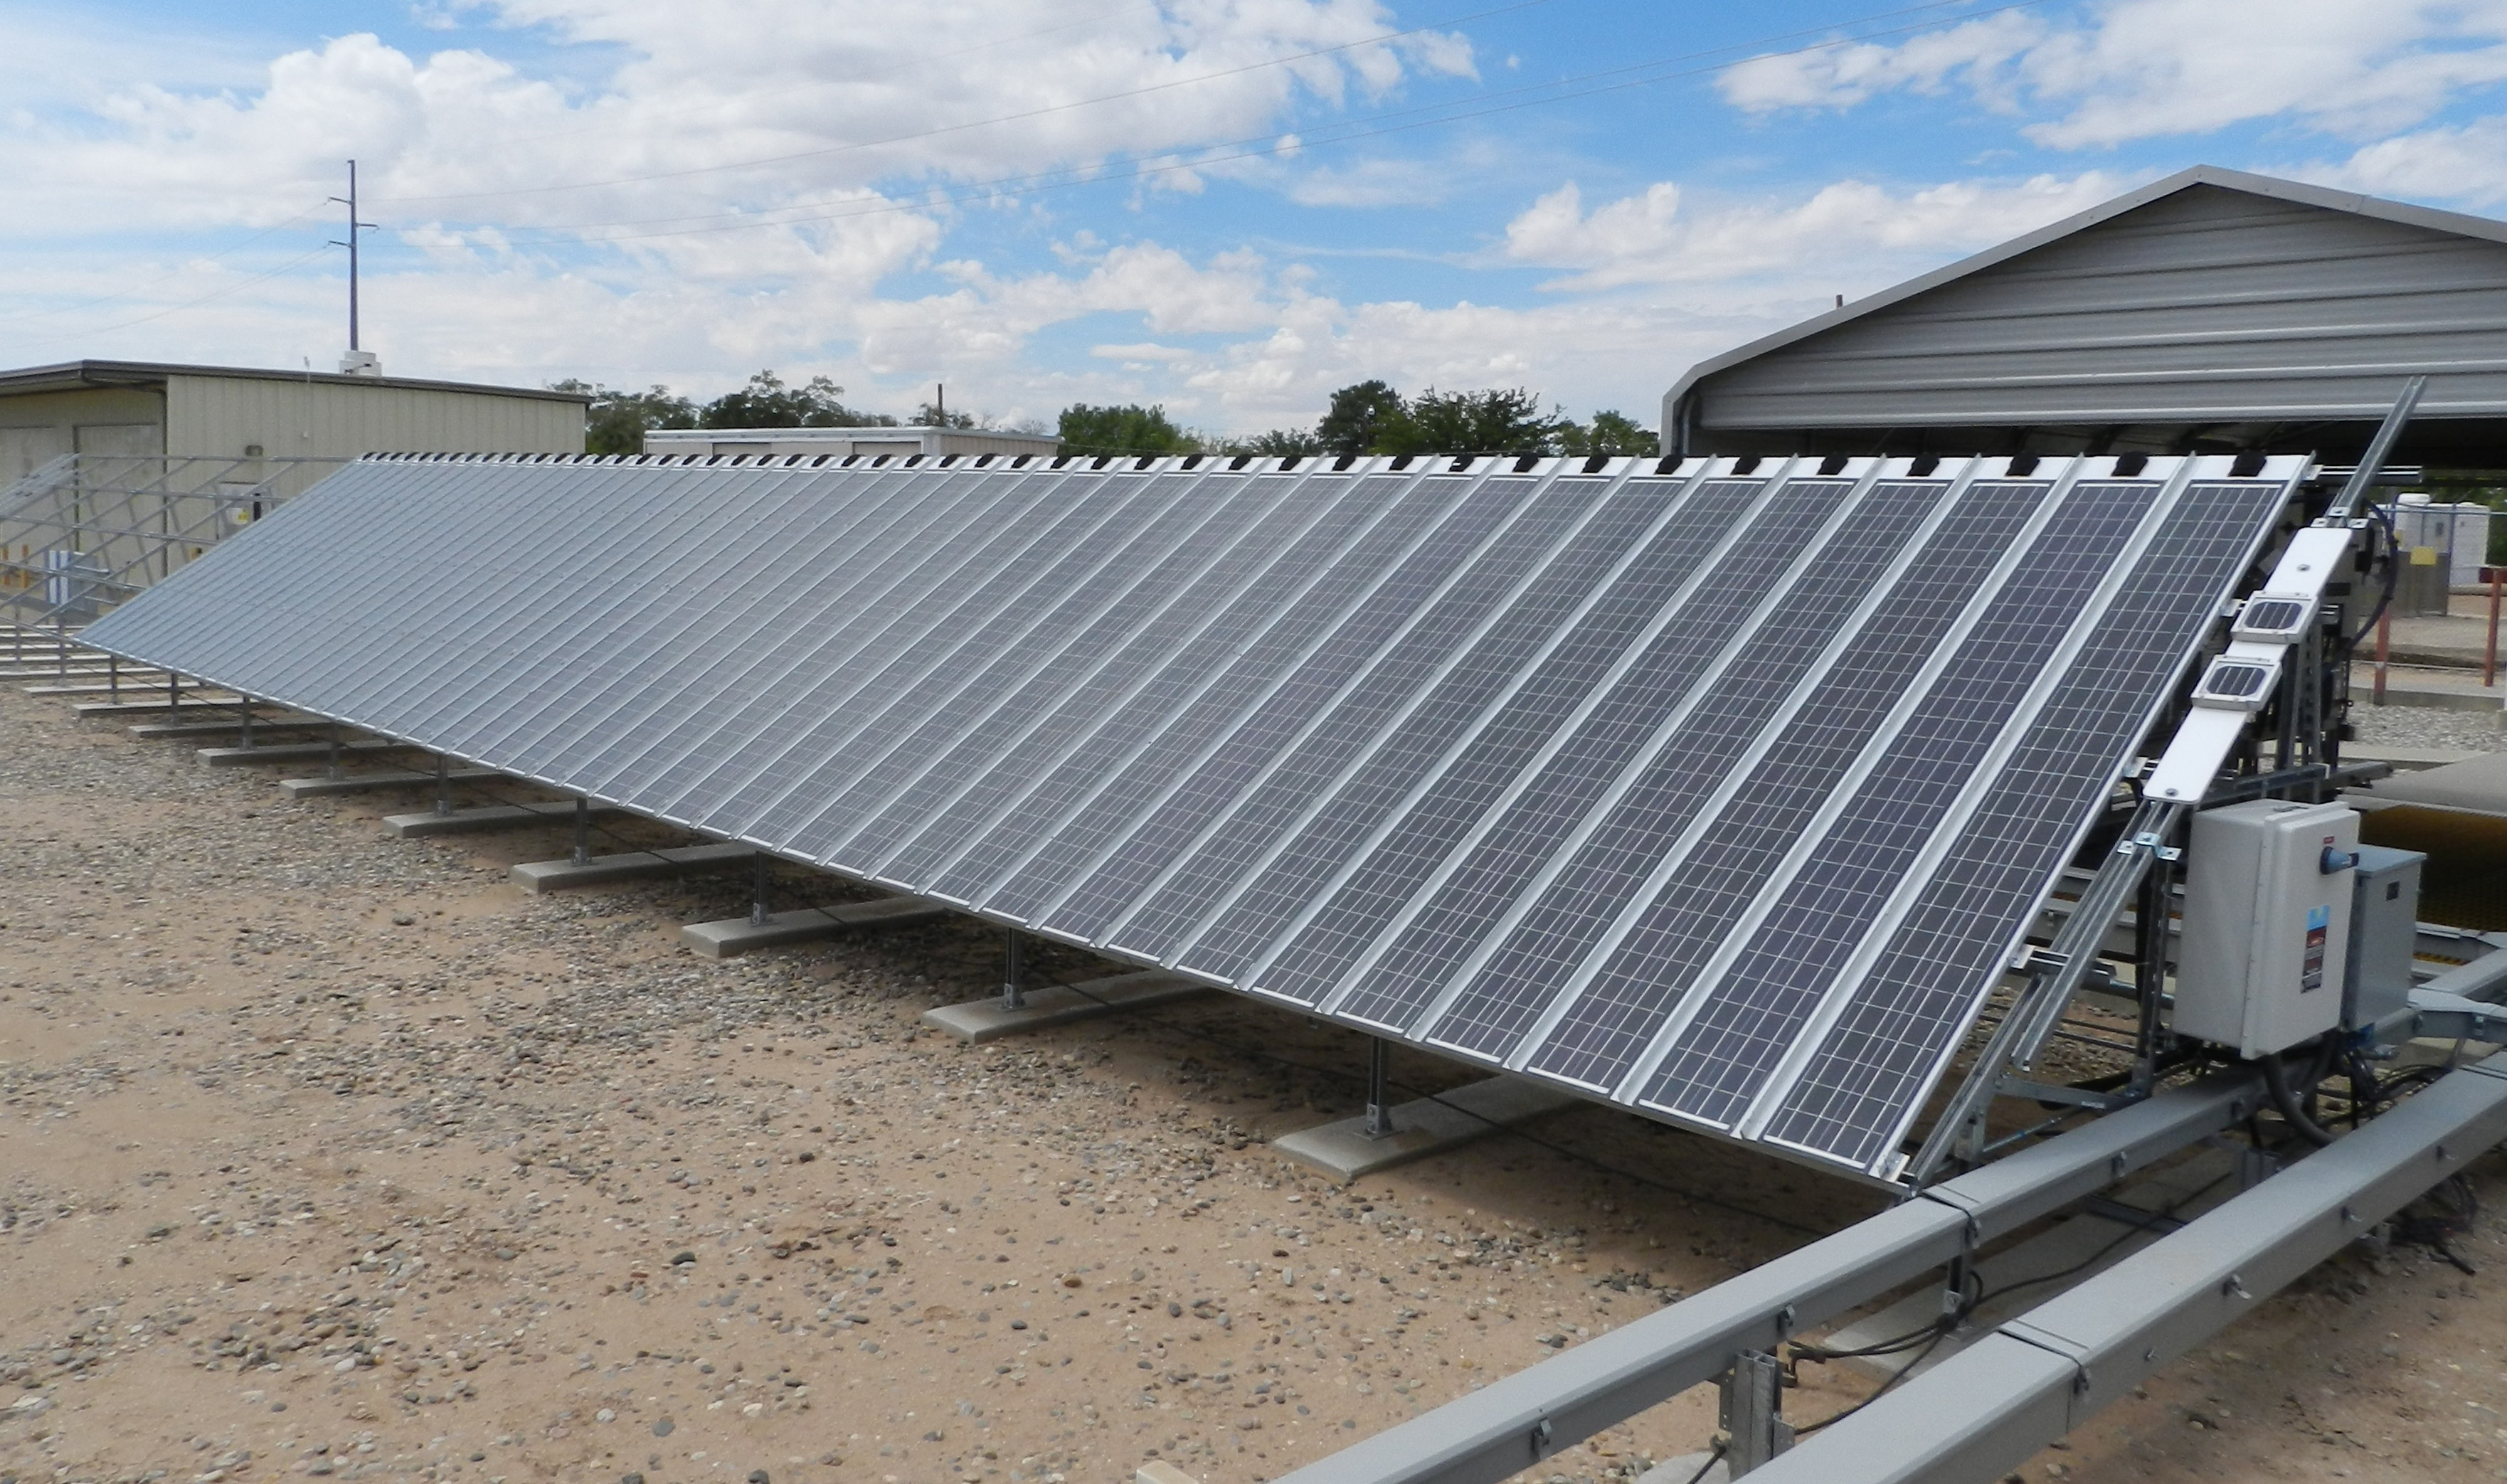 Photo of multiple PV modules attached to make a long array